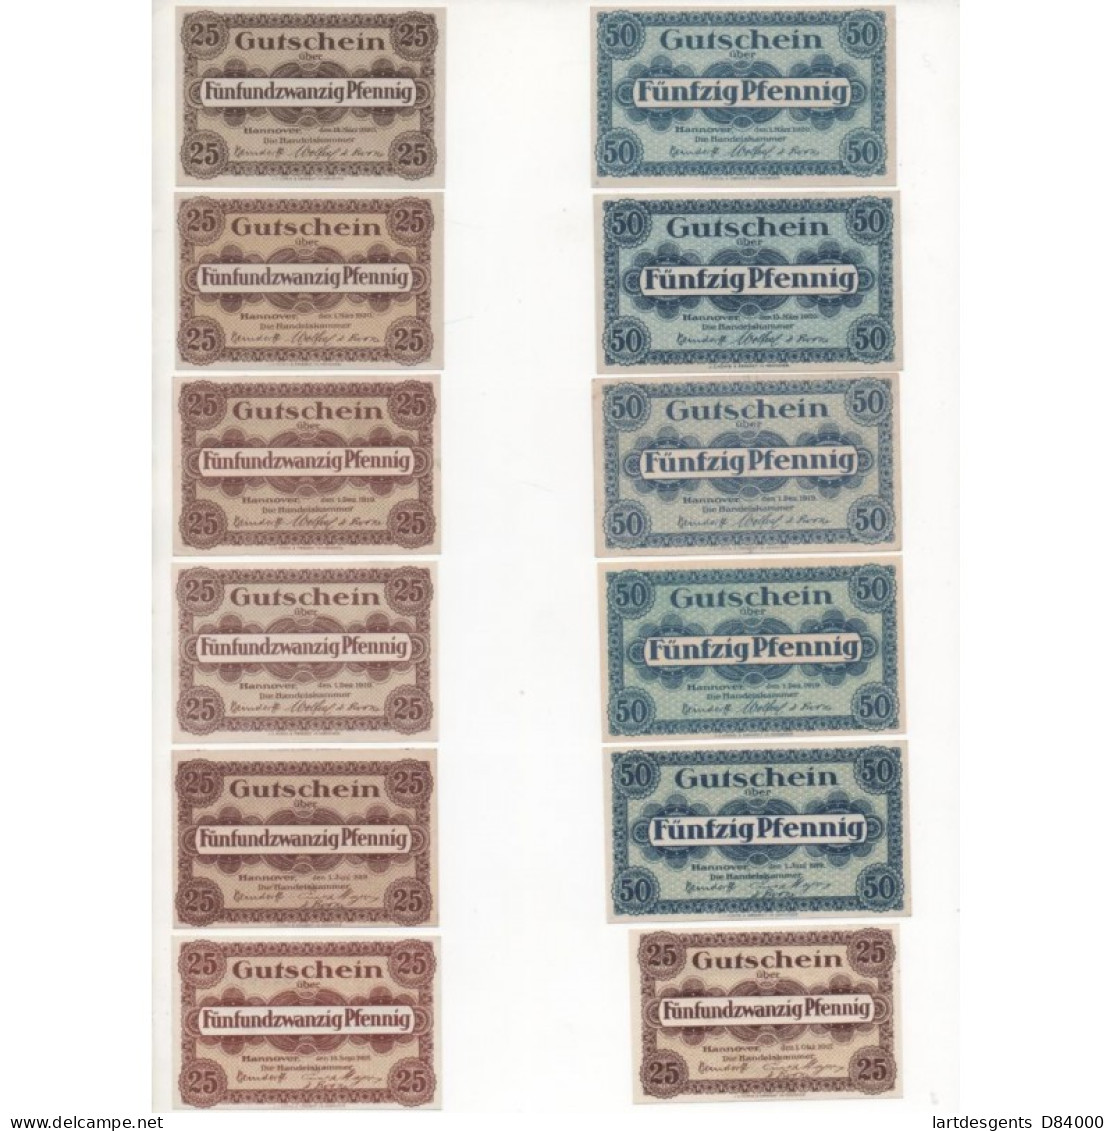 NOTGELD - HANNOVER - 22 Different Notes - 1917-1920 (H035) - [11] Emissions Locales